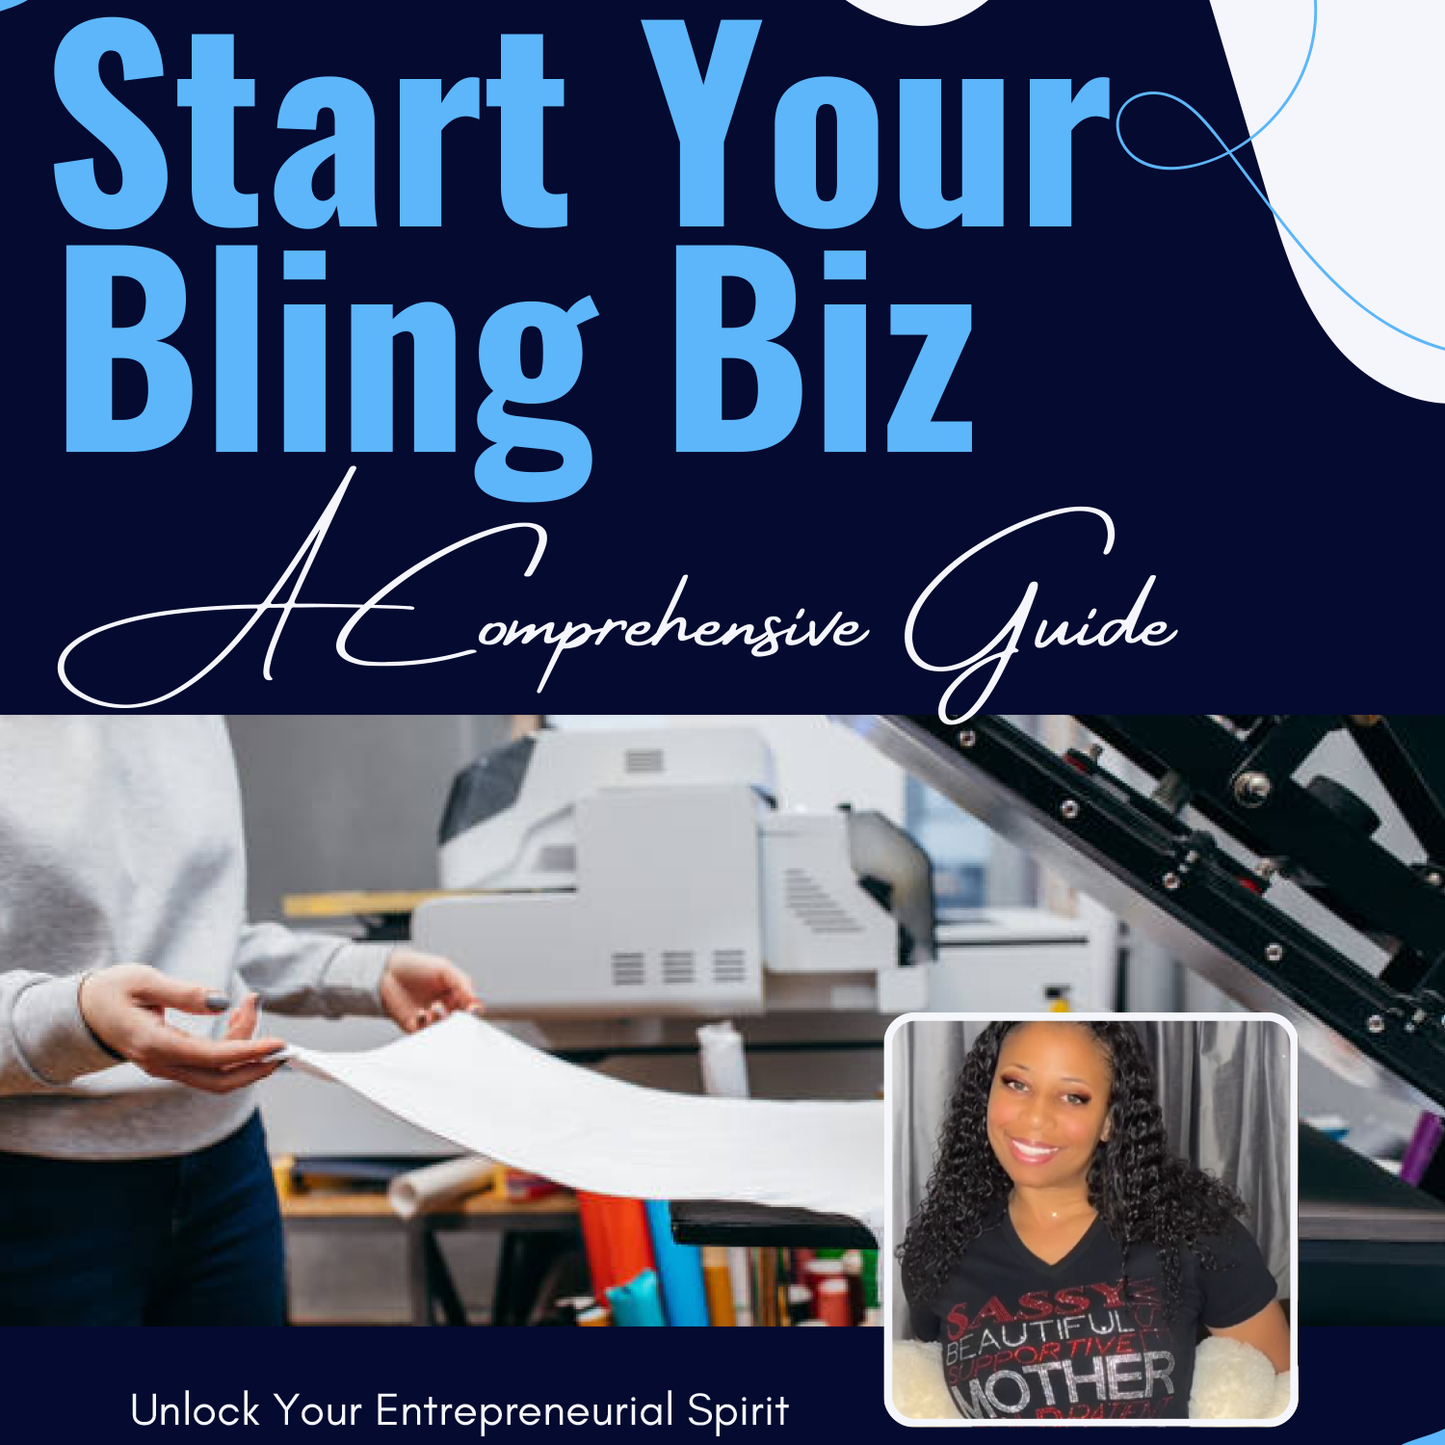 Starting Your Bling Biz - A Comprehensive Guide